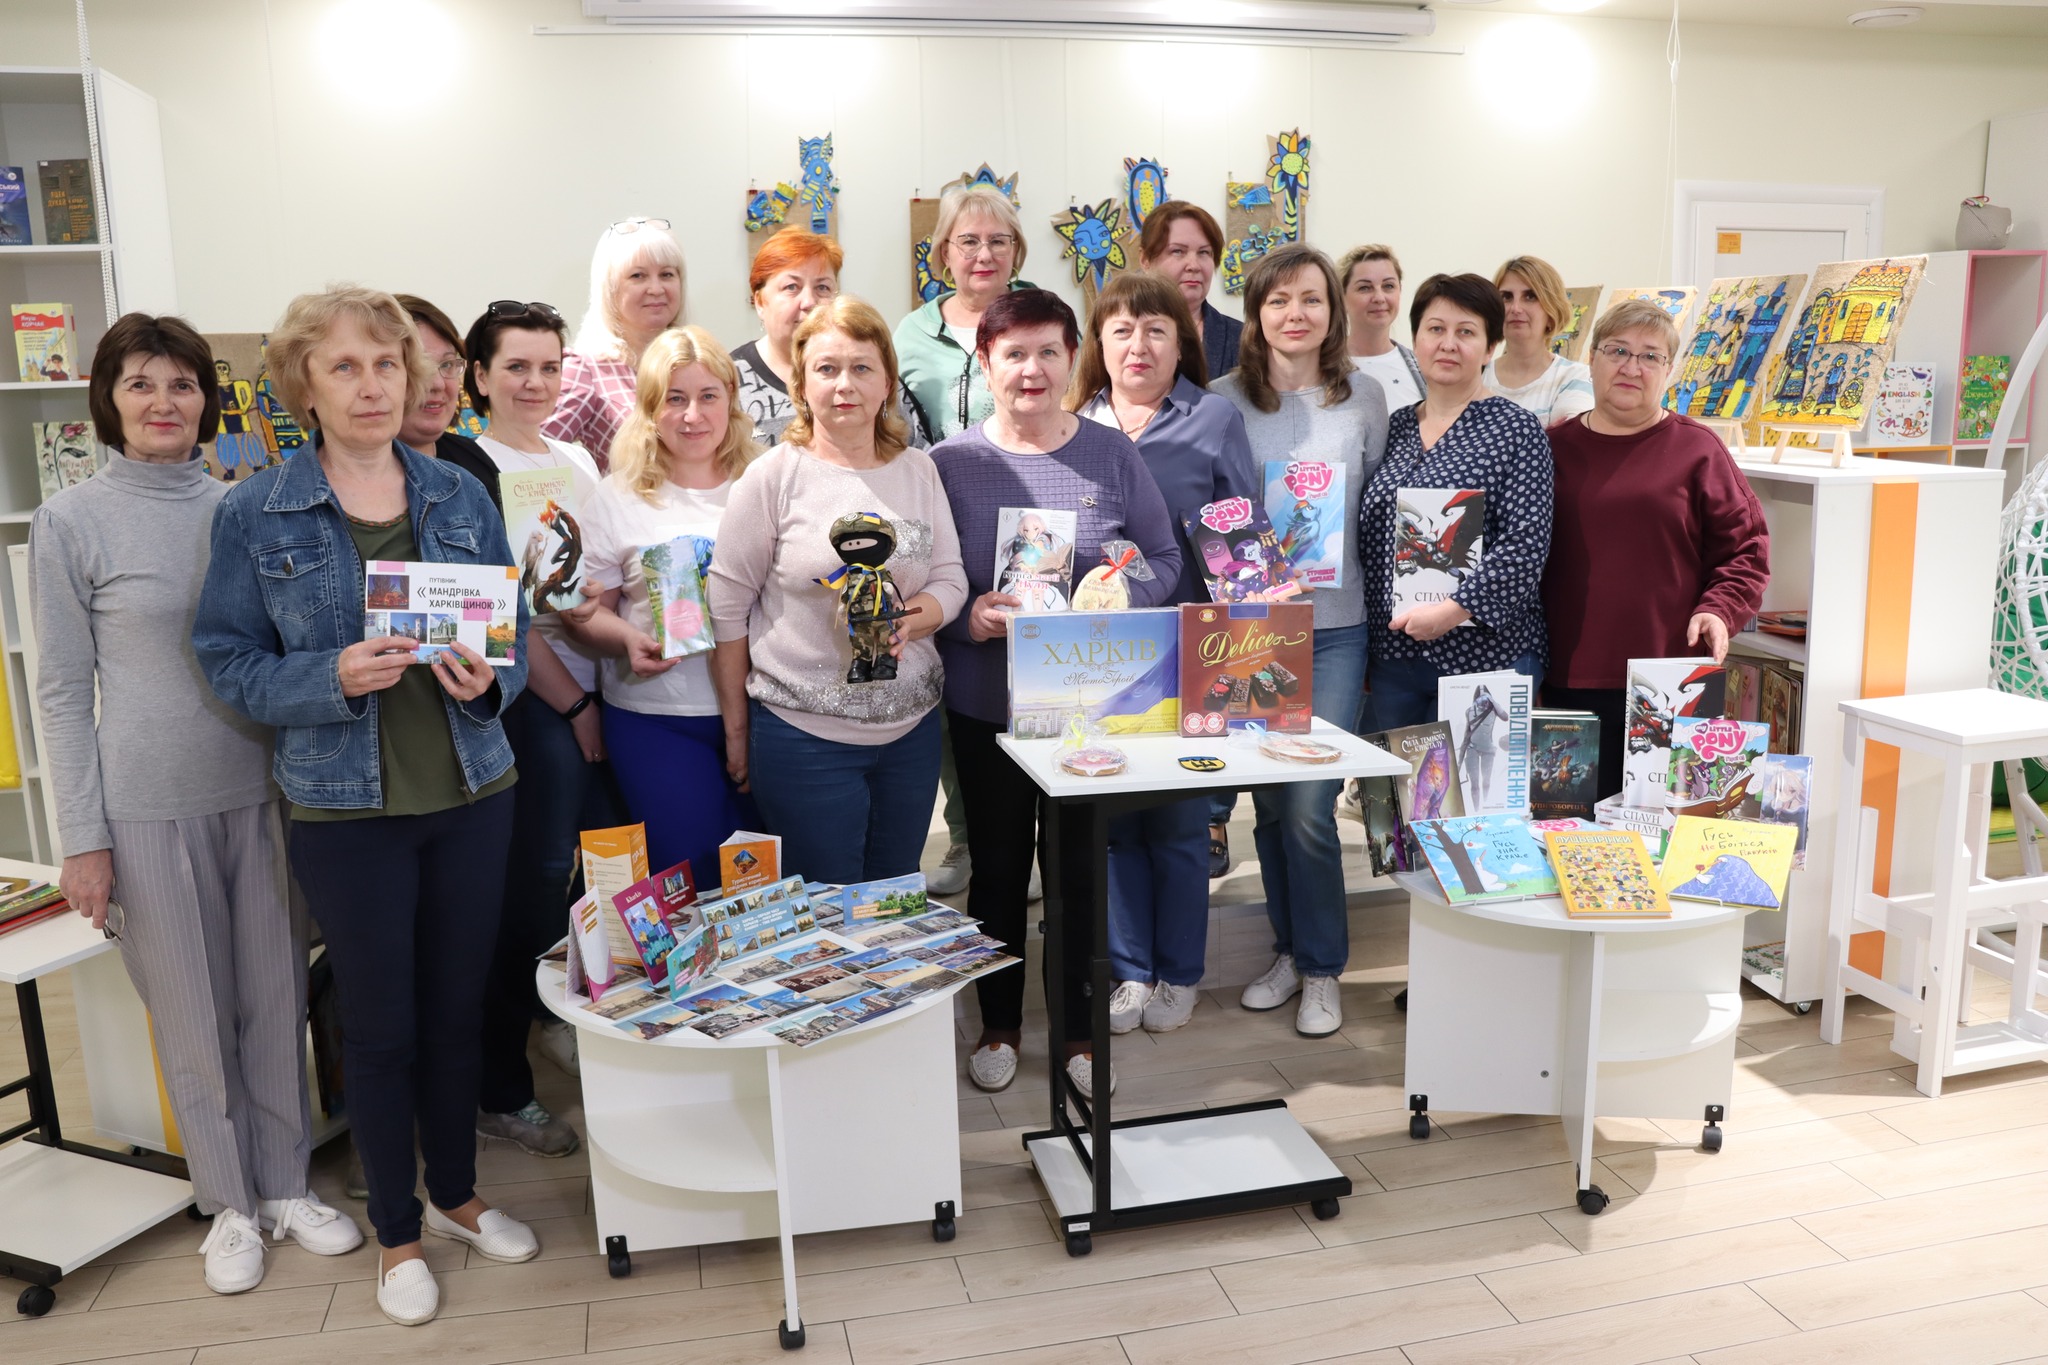 The staff of the Mykolaiv library received an unexpected and very pleasant surprise from the northeast of the country